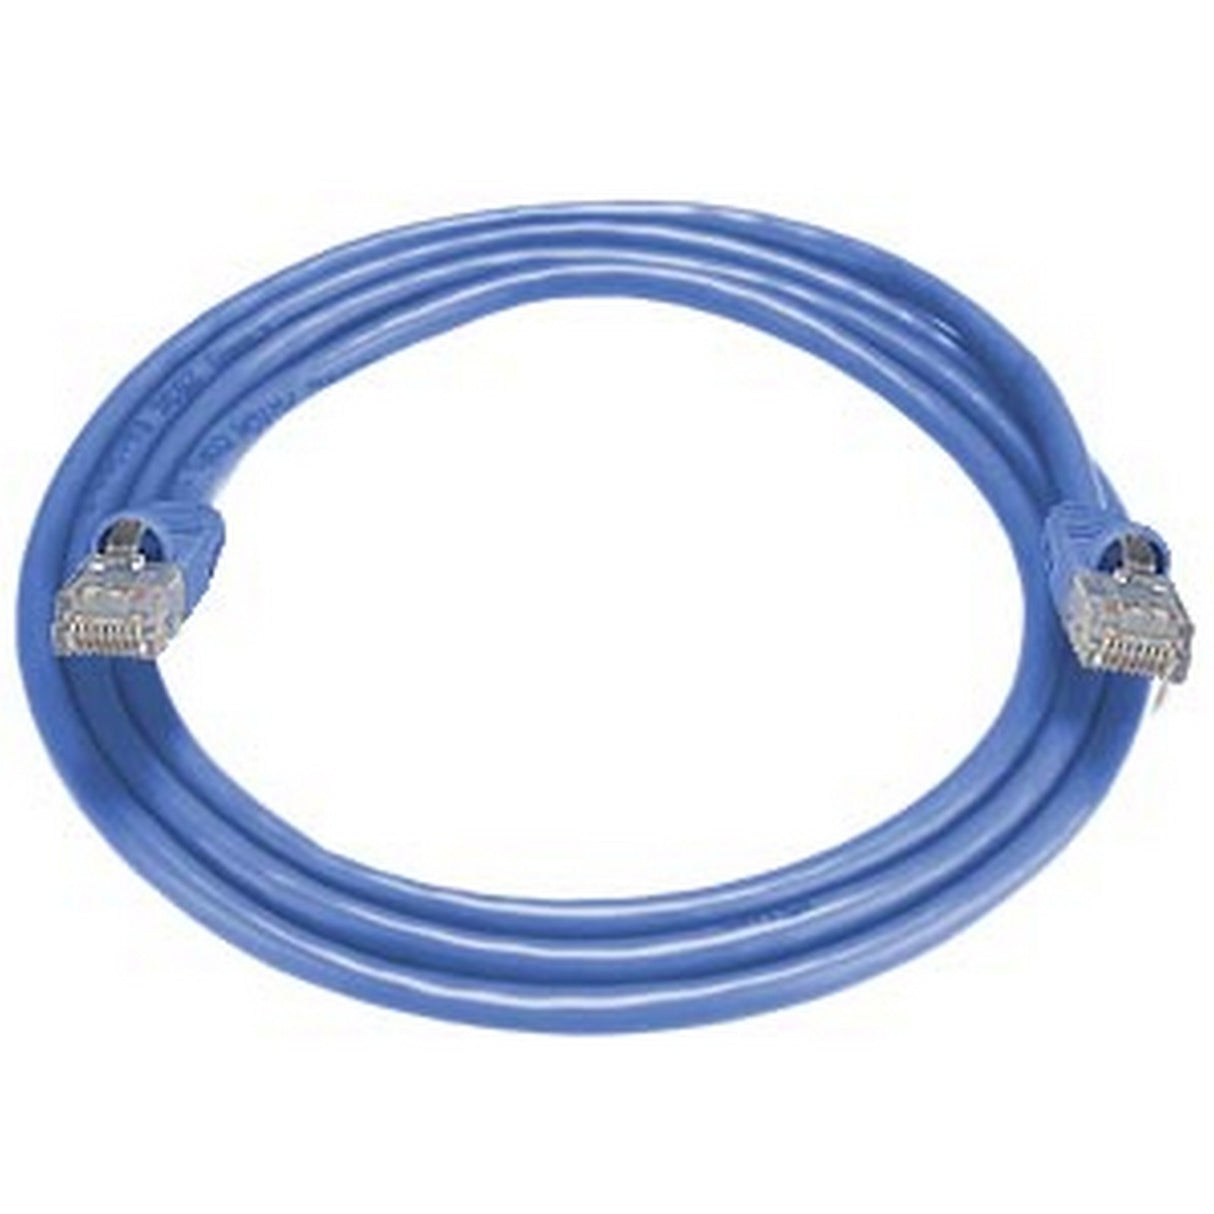 NTI CAT5-10-BLUE CAT5 Cable, Male to Male, Blue, 10-Foot